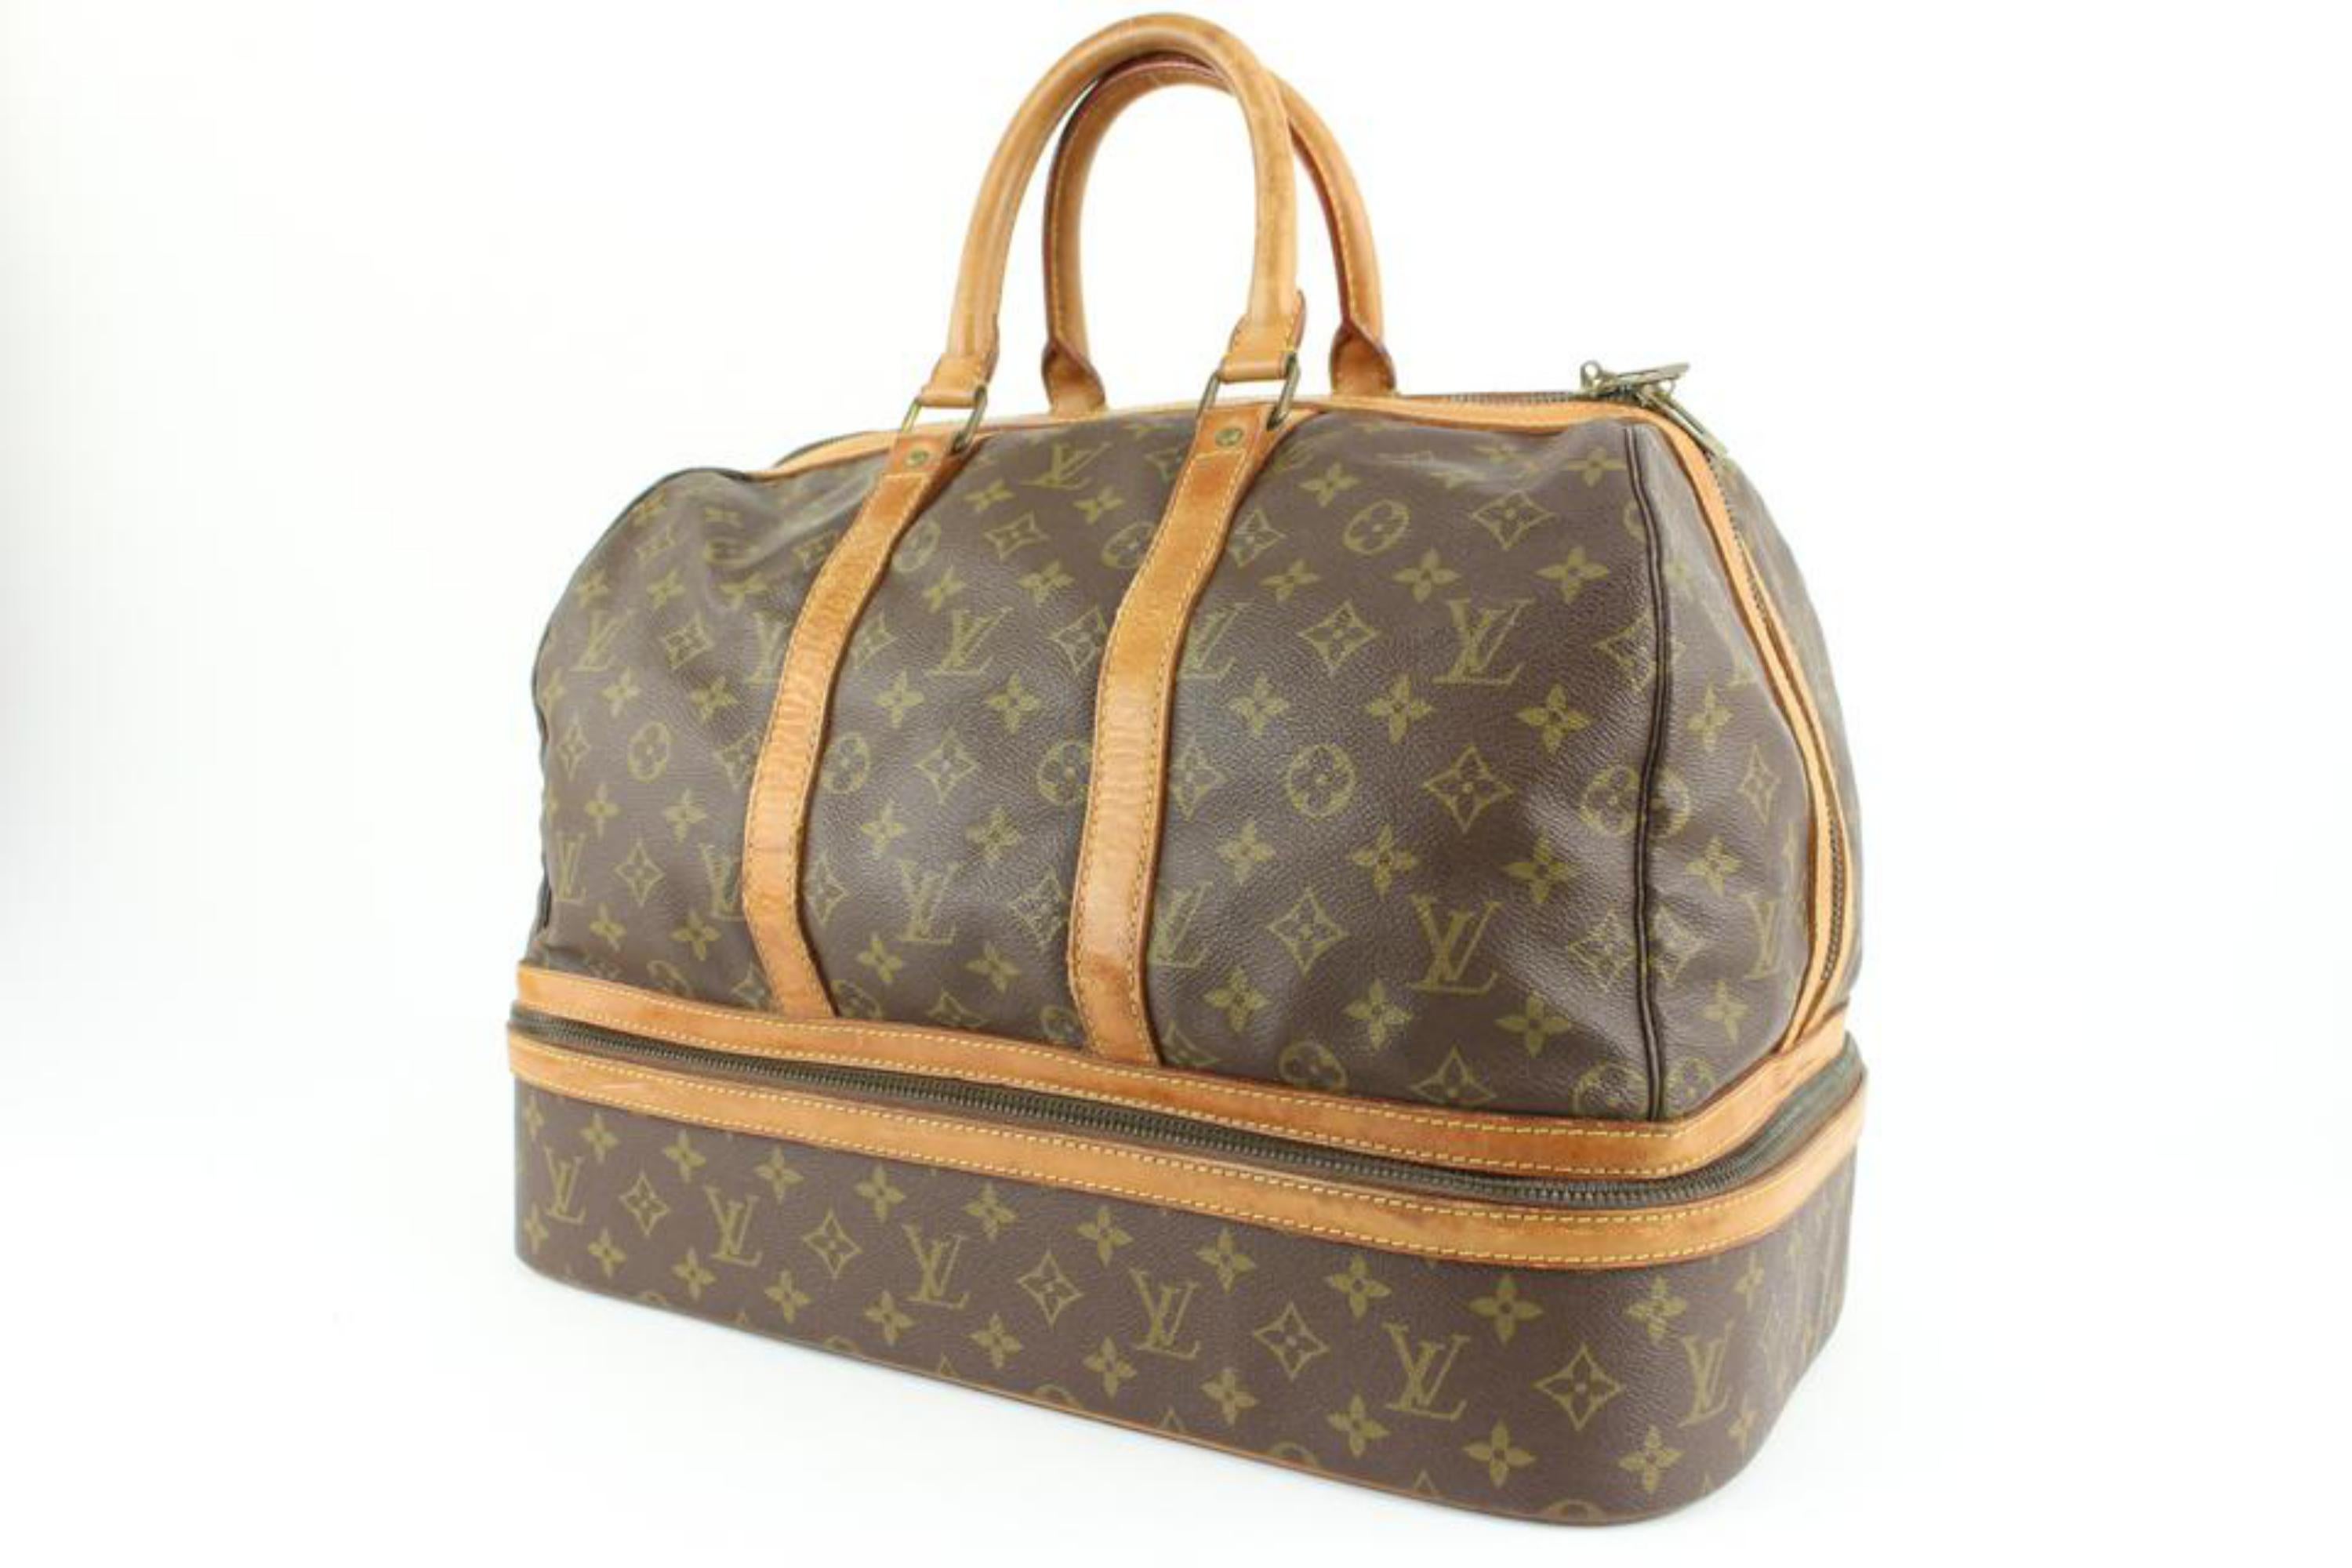 Louis Vuitton Discontinued Monogram Sac Sport Duffle with Shoe Trunk Base 113lv56
Made In: France
Measurements: Length:  17